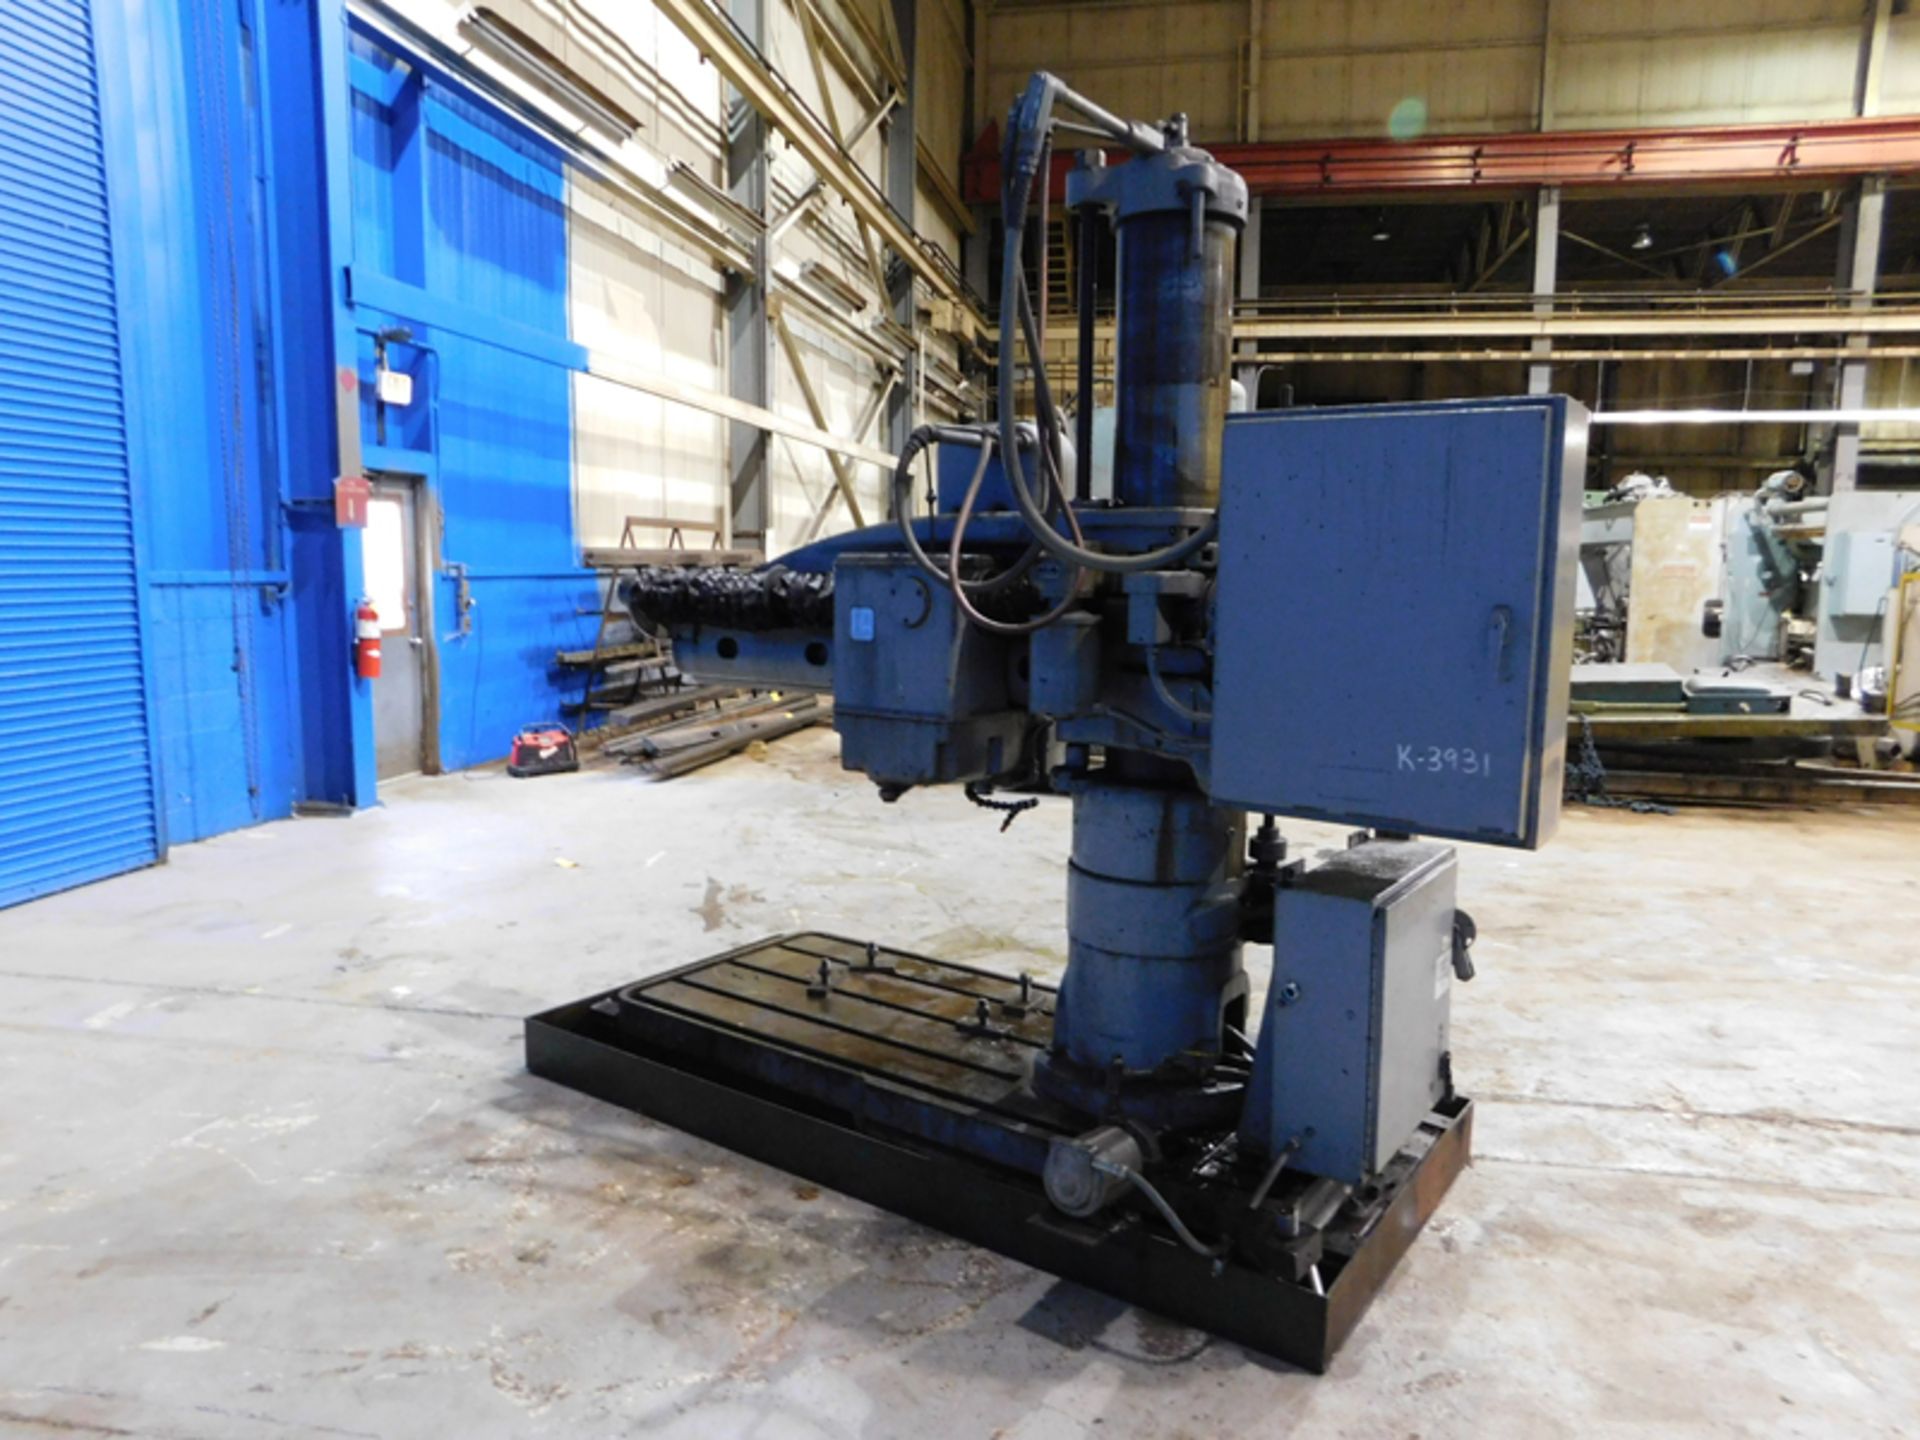 Carlton Radial Arm Drill | 4' x 9", Mdl: 1A, S/N: 4308, Located In: Painesville, OH - Image 6 of 9